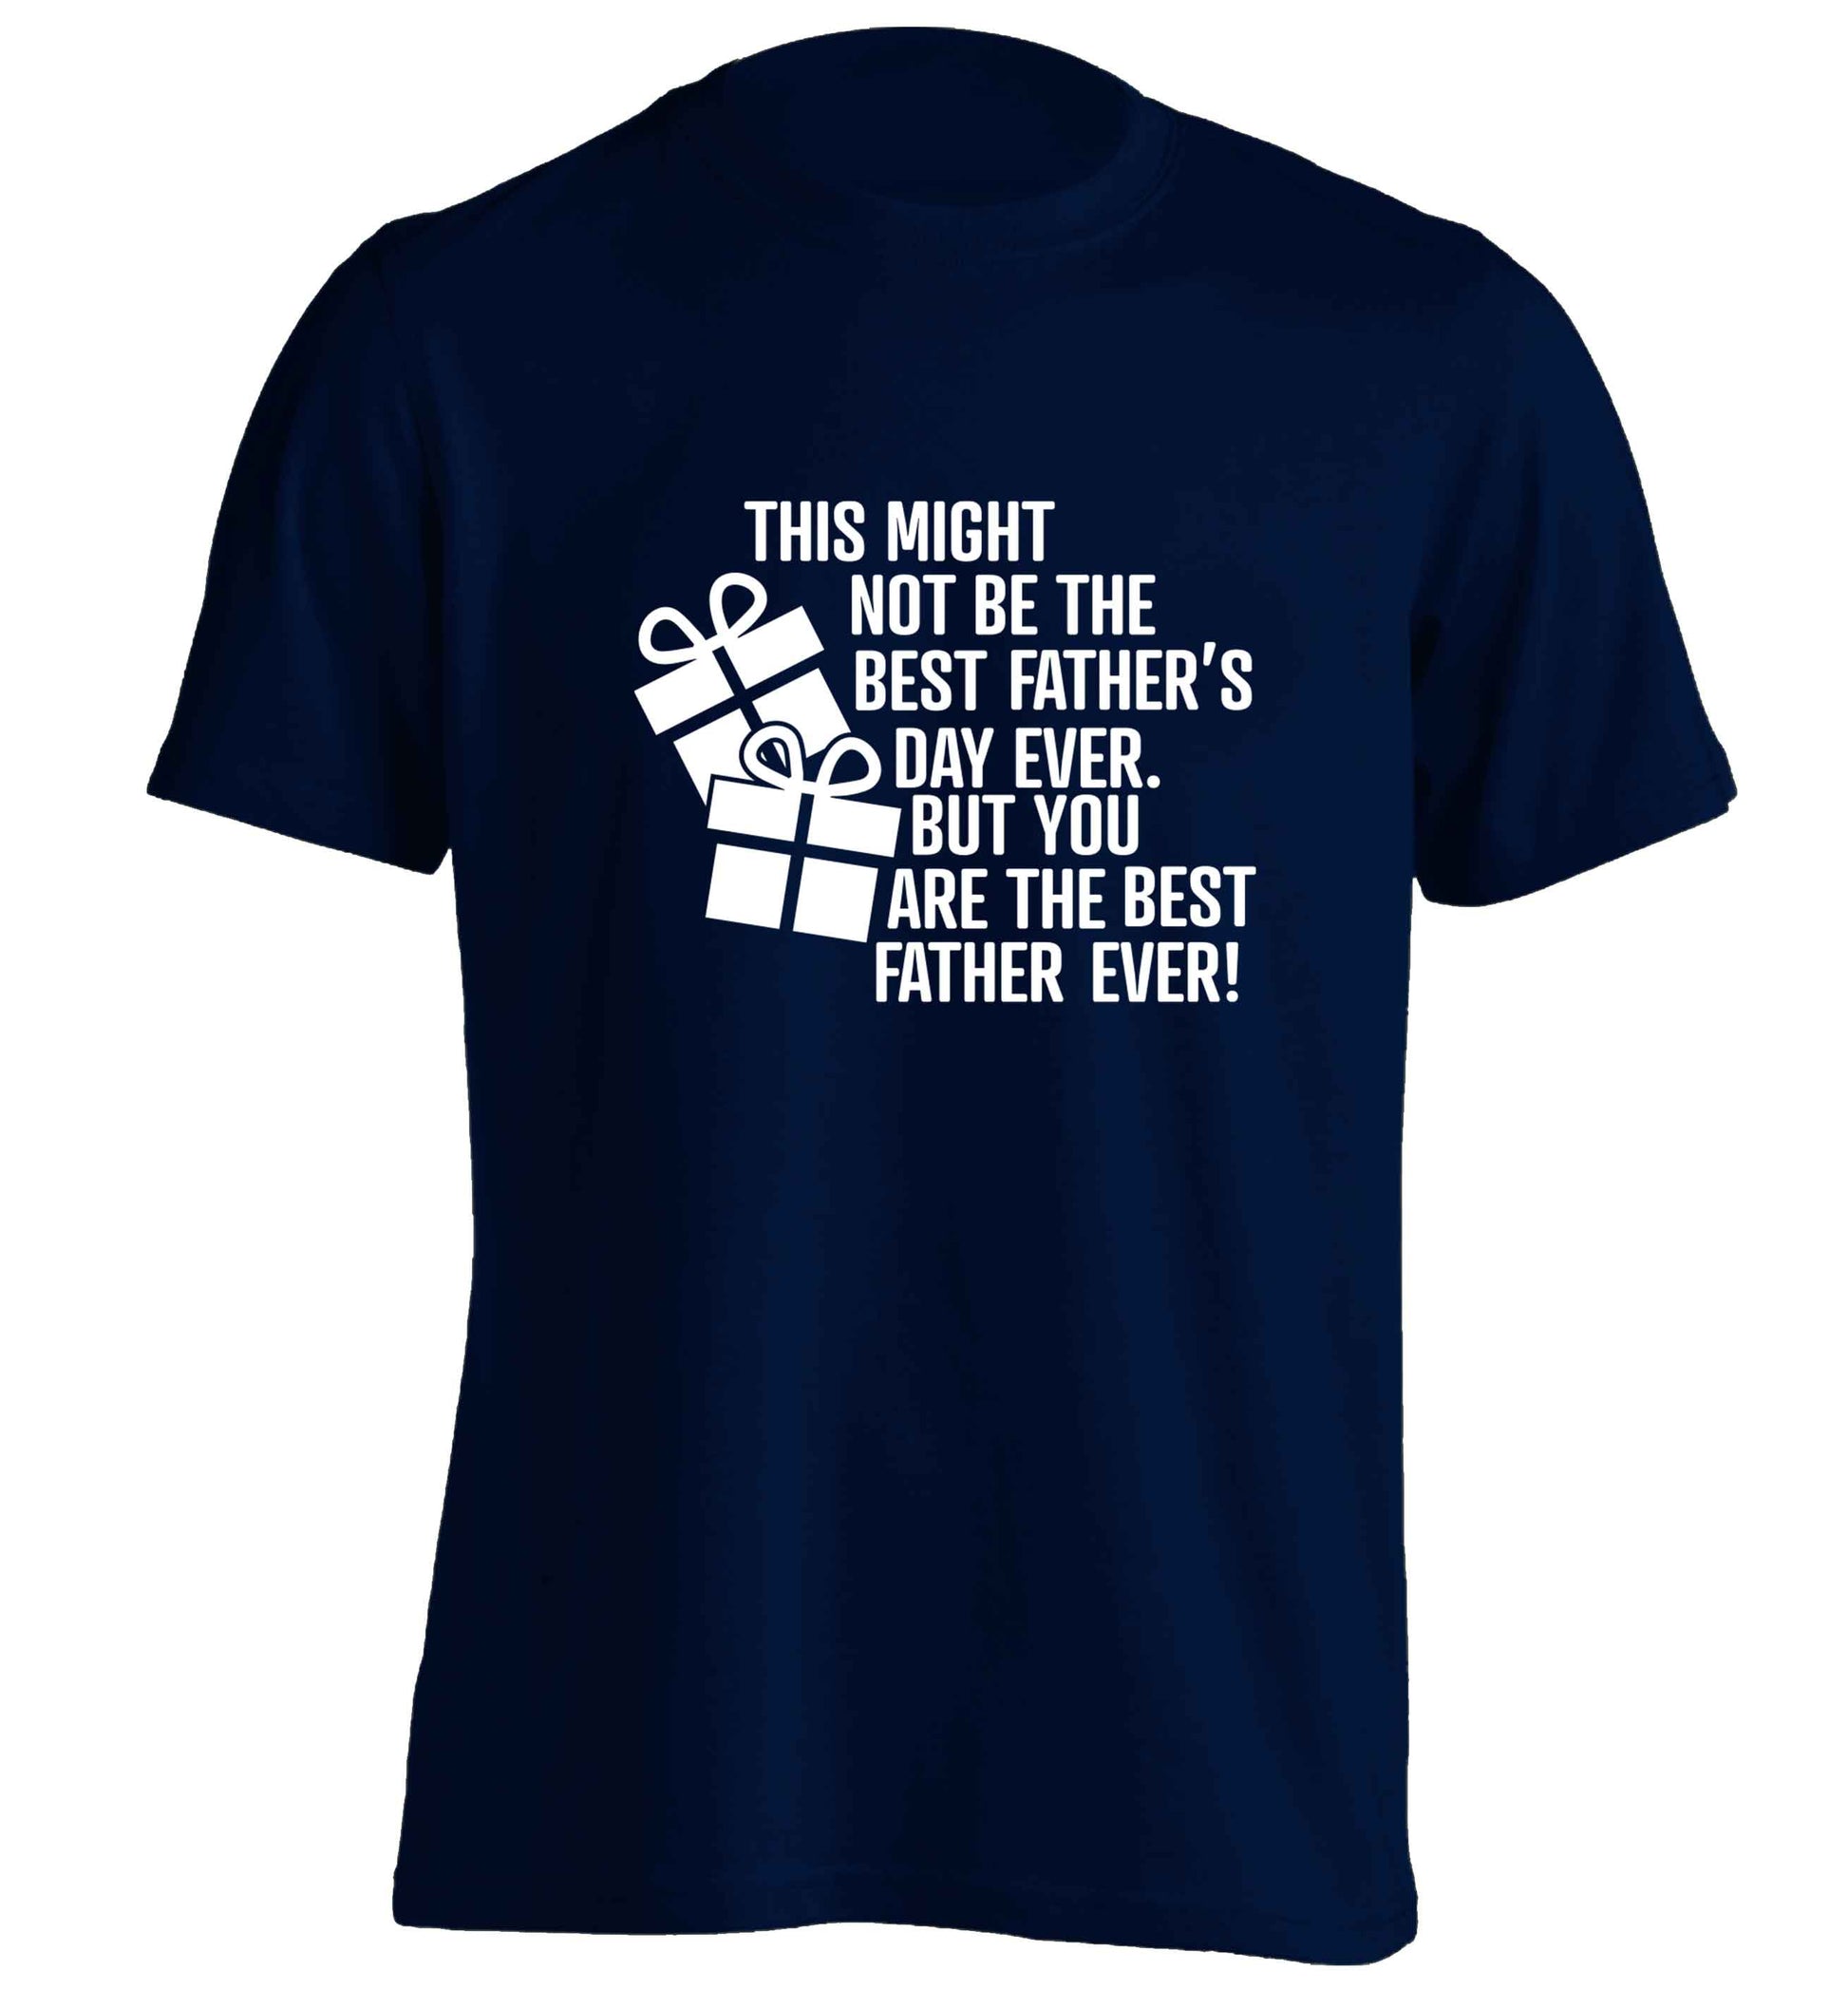 It might not be the best Father's Day ever but you are the best father ever! adults unisex navy Tshirt 2XL